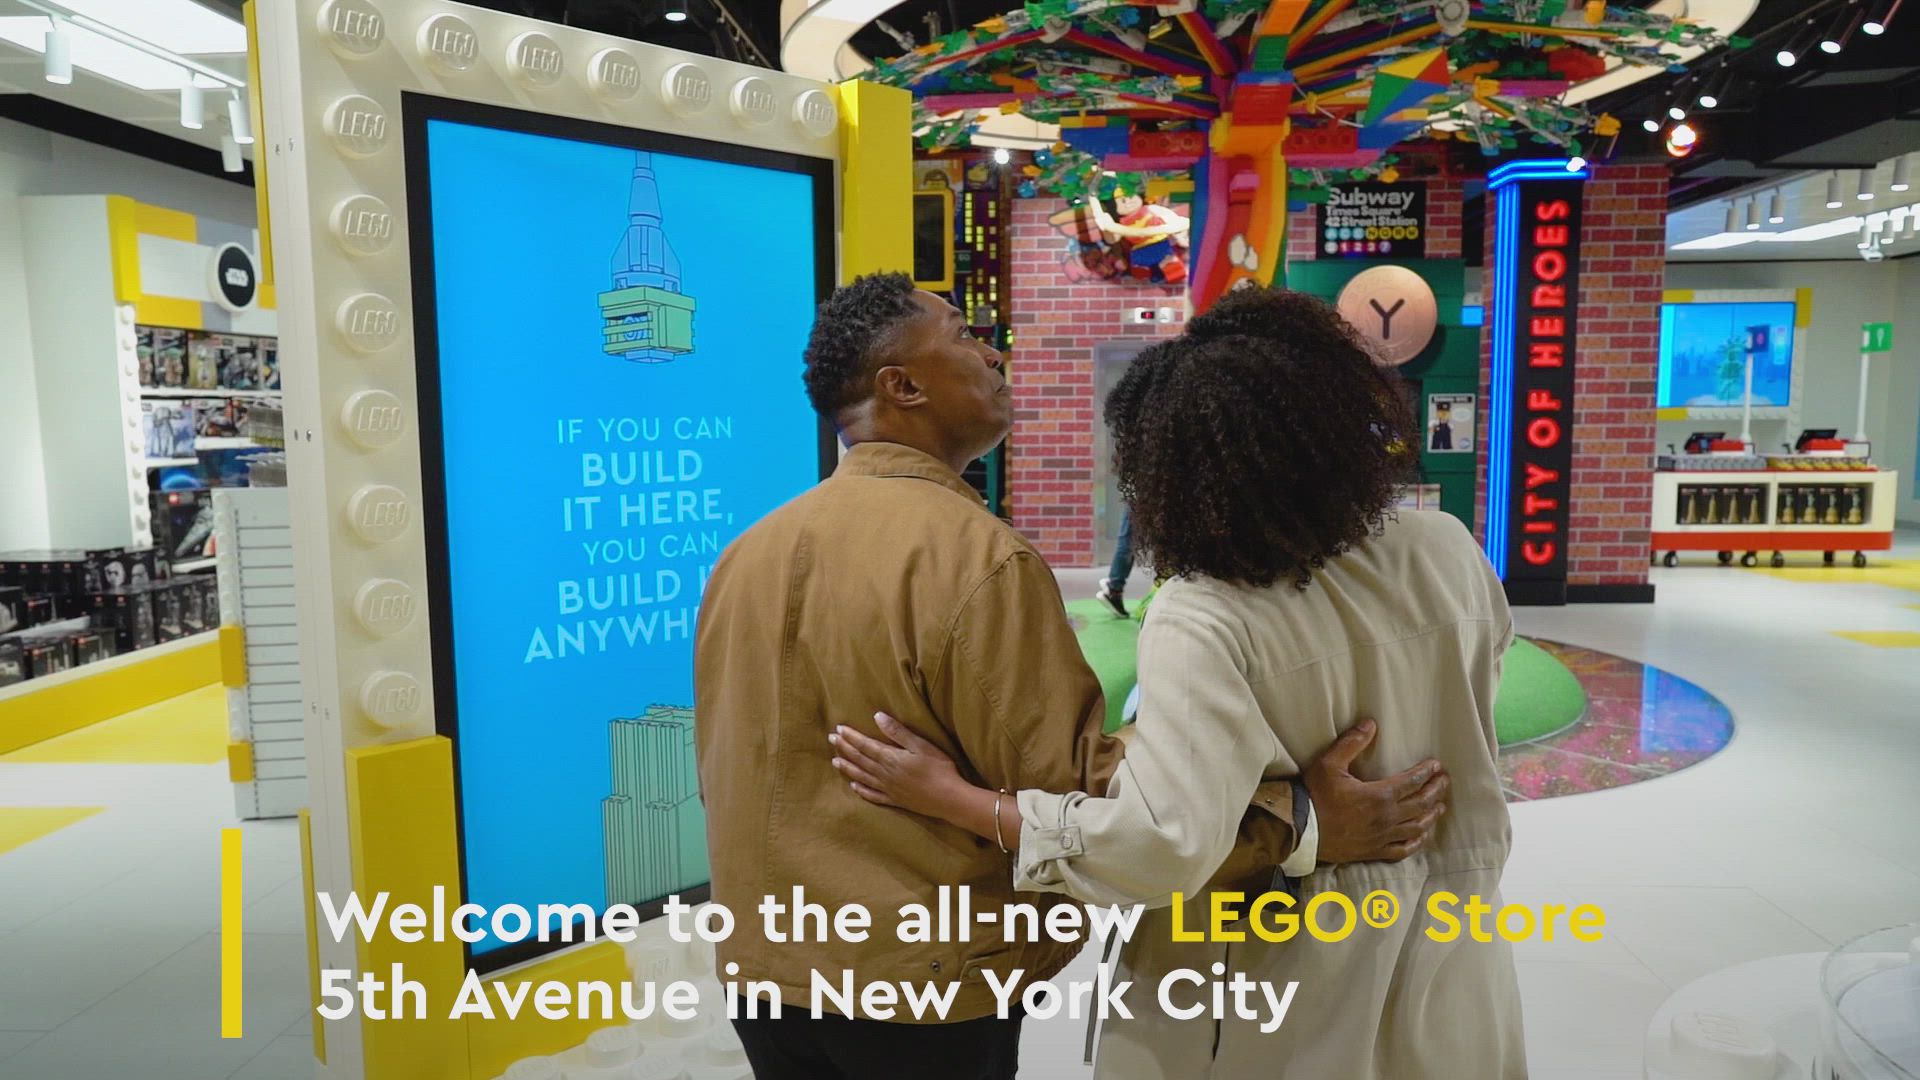 NYC FLAGSHIP STORE About Us - LEGO.com